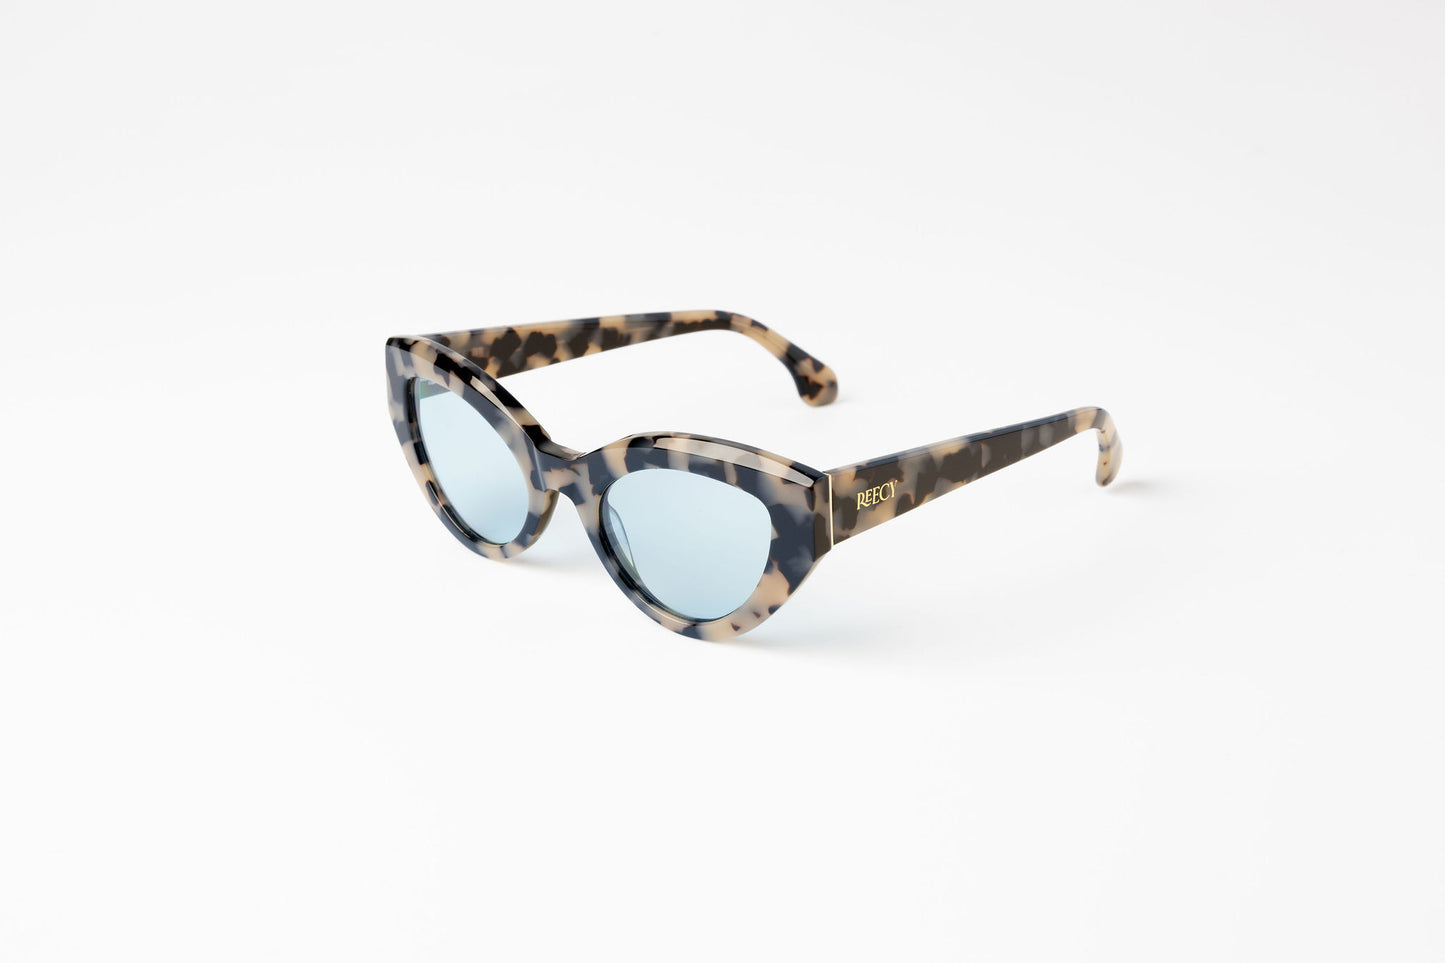 Angle view of light tortoiseshell cateye sustainable and biodegradable Cleo Quinoa Blue sunglasses with light blue lens